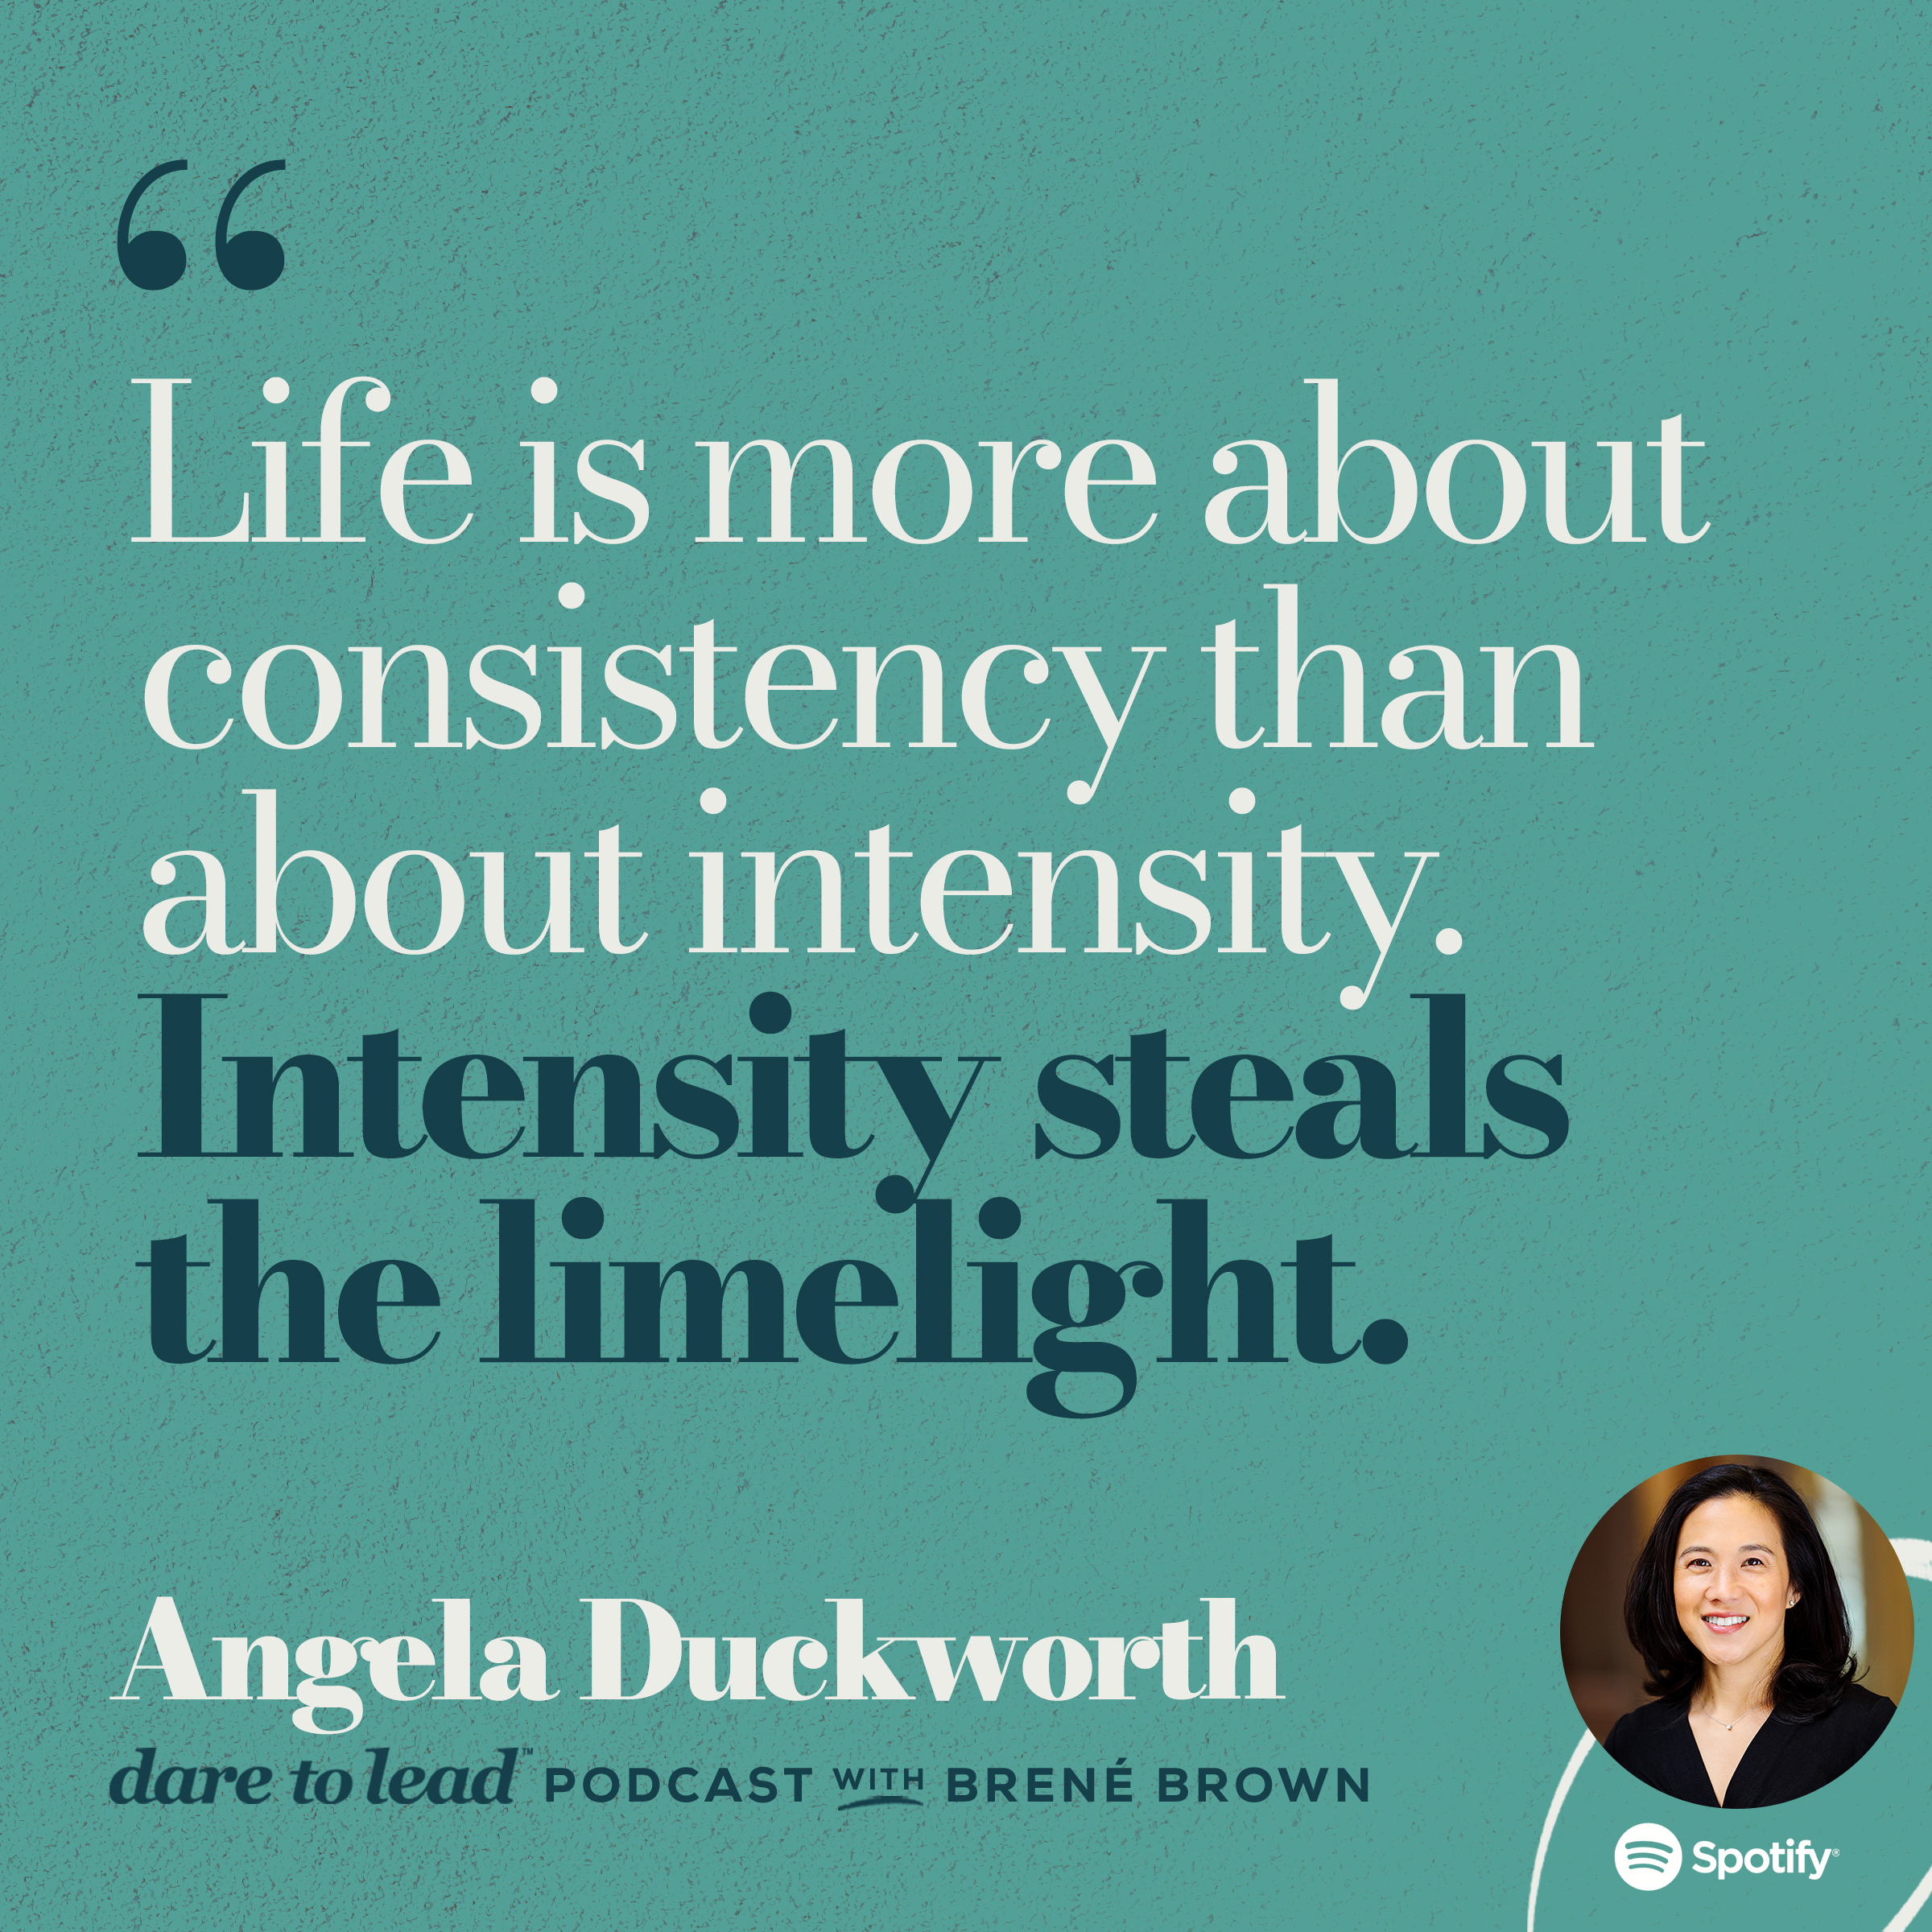 Life is more about consistency than about intensity. Intensity steals the limelight. -by Angela Duckworth